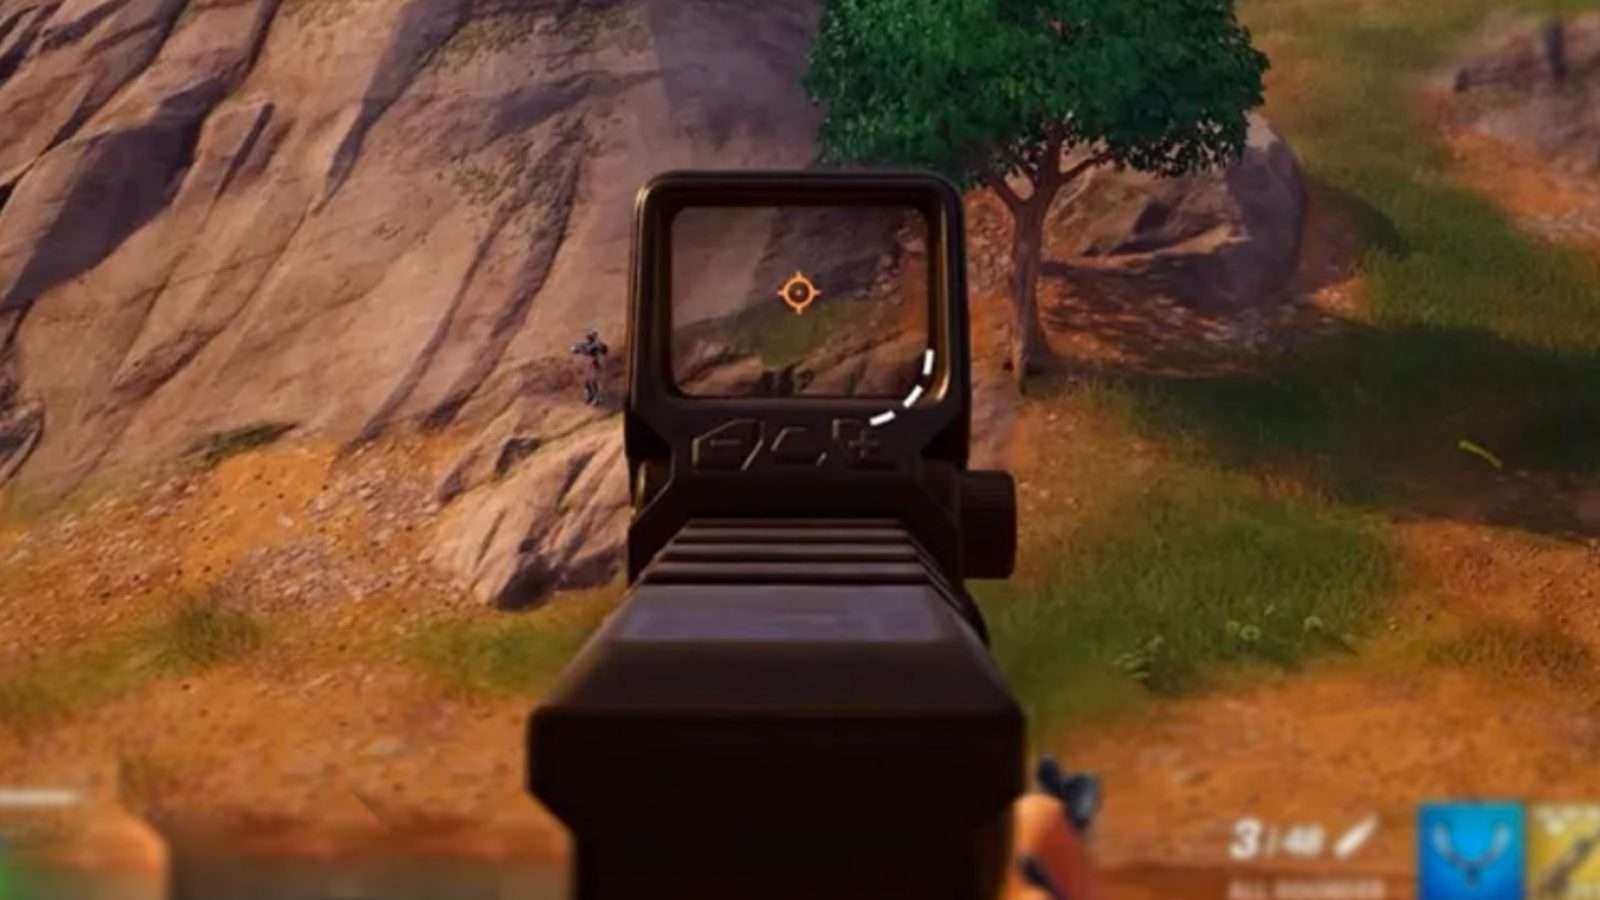 Fortnite player aiming down sight of their weapon using a sight attachment in Chapter 5.